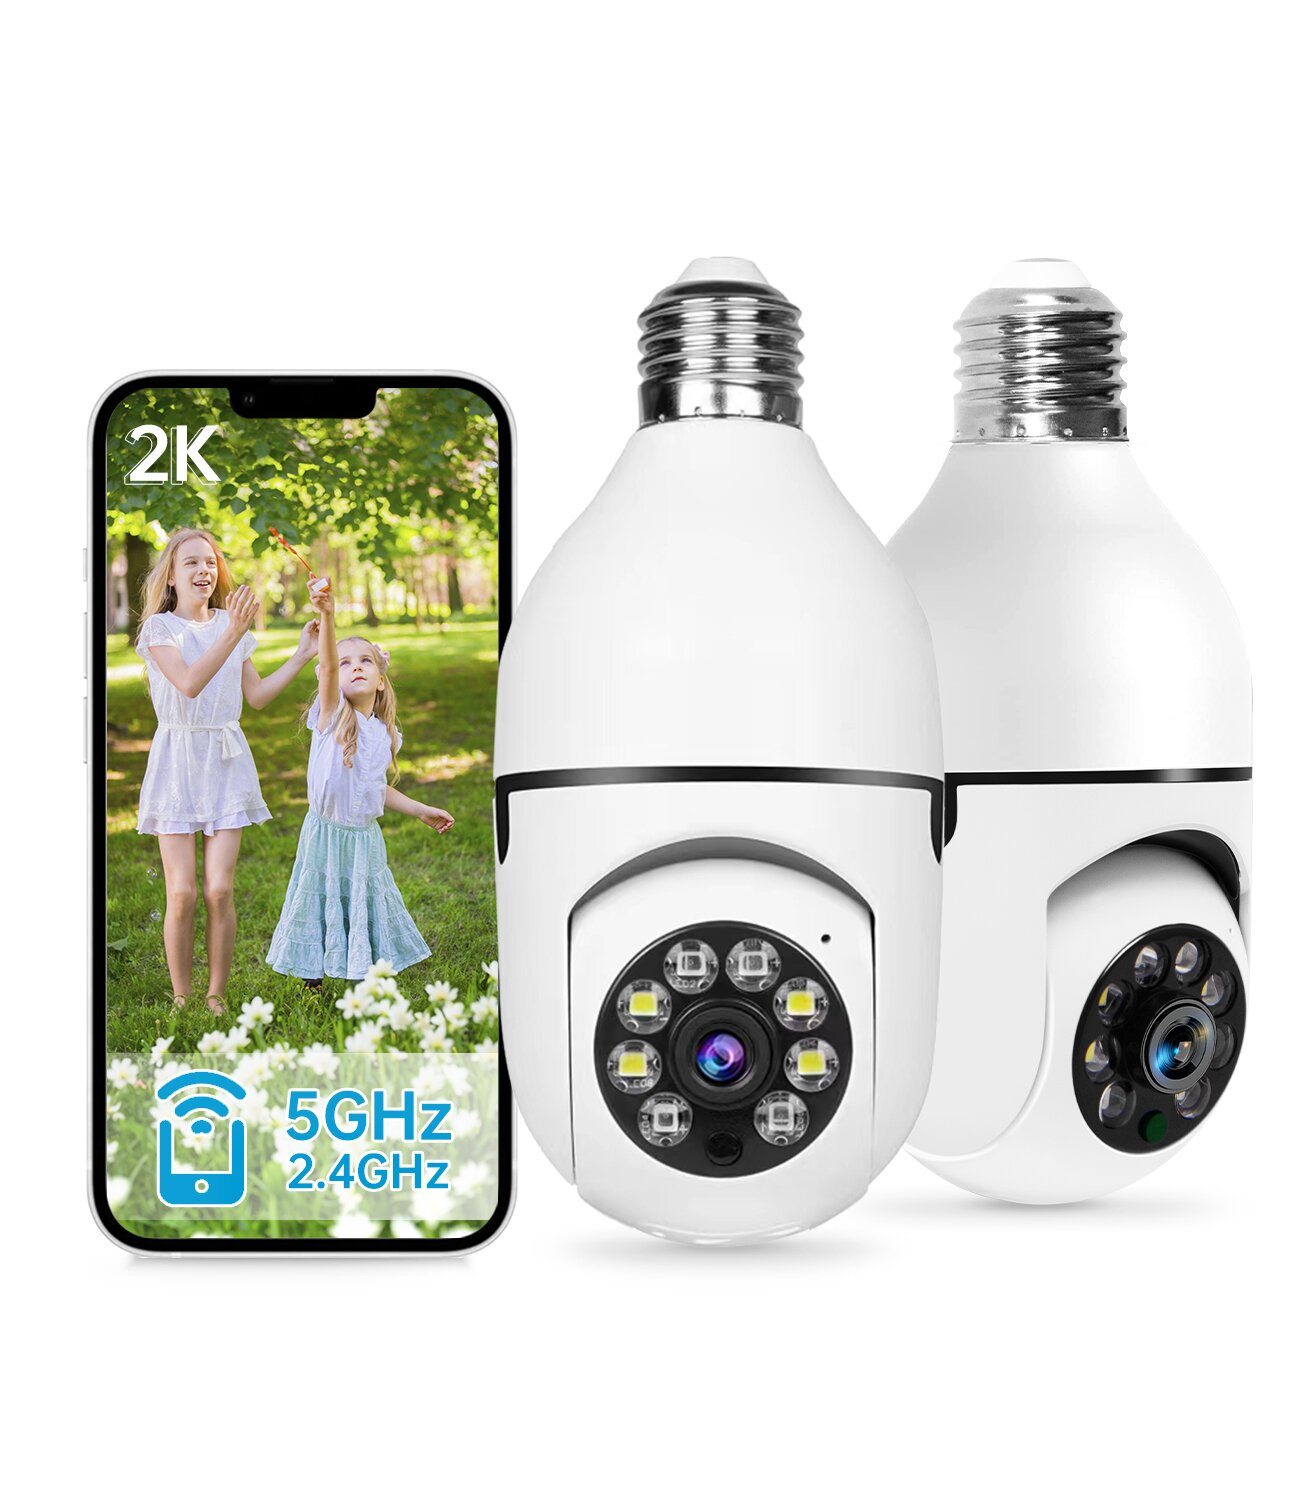 Bulb Security Camera Wireless 2.4GHz/5GHz -360 Degree Panoramic 3mp Wifi Camera for lndoor and Outdoor FUII Color Day and Night 2 一 Wayaudio, Works With Alexa